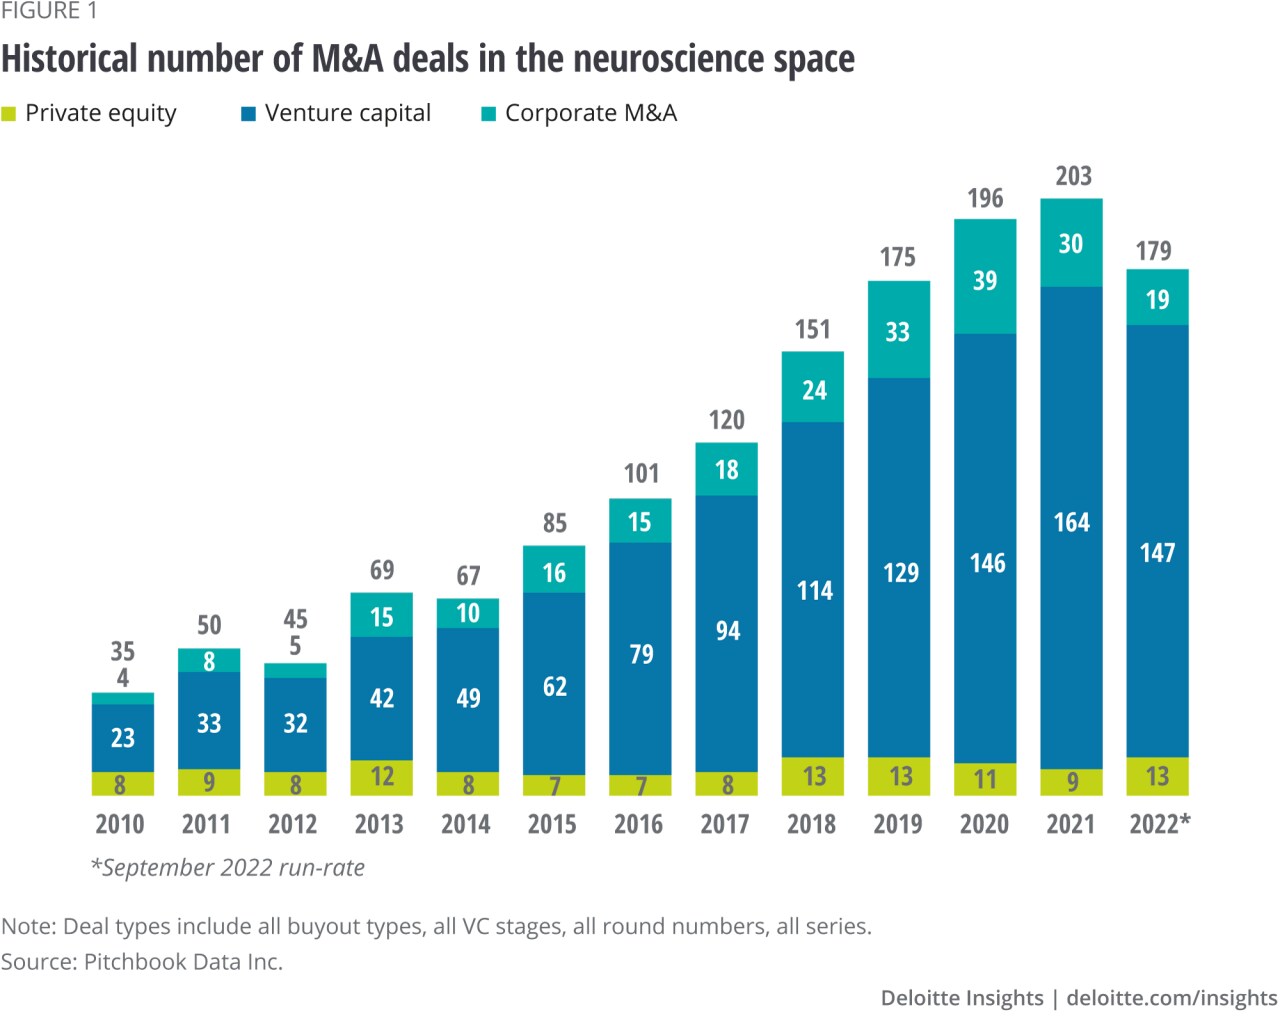 Figure 1. Historical number of M&A deals in the neuroscience space